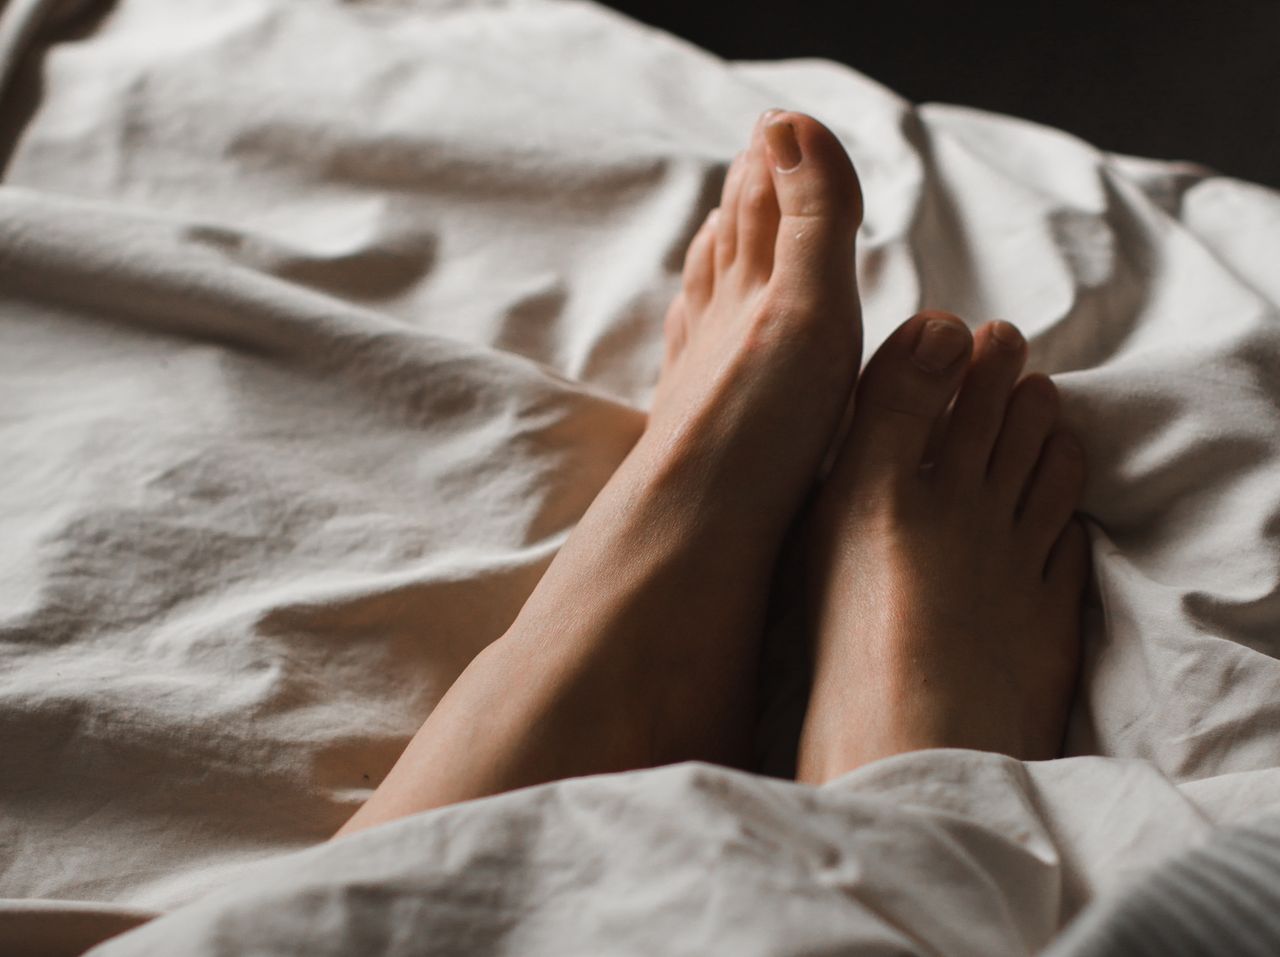 Sleeping naked might not be as beneficial as you think, experts warn